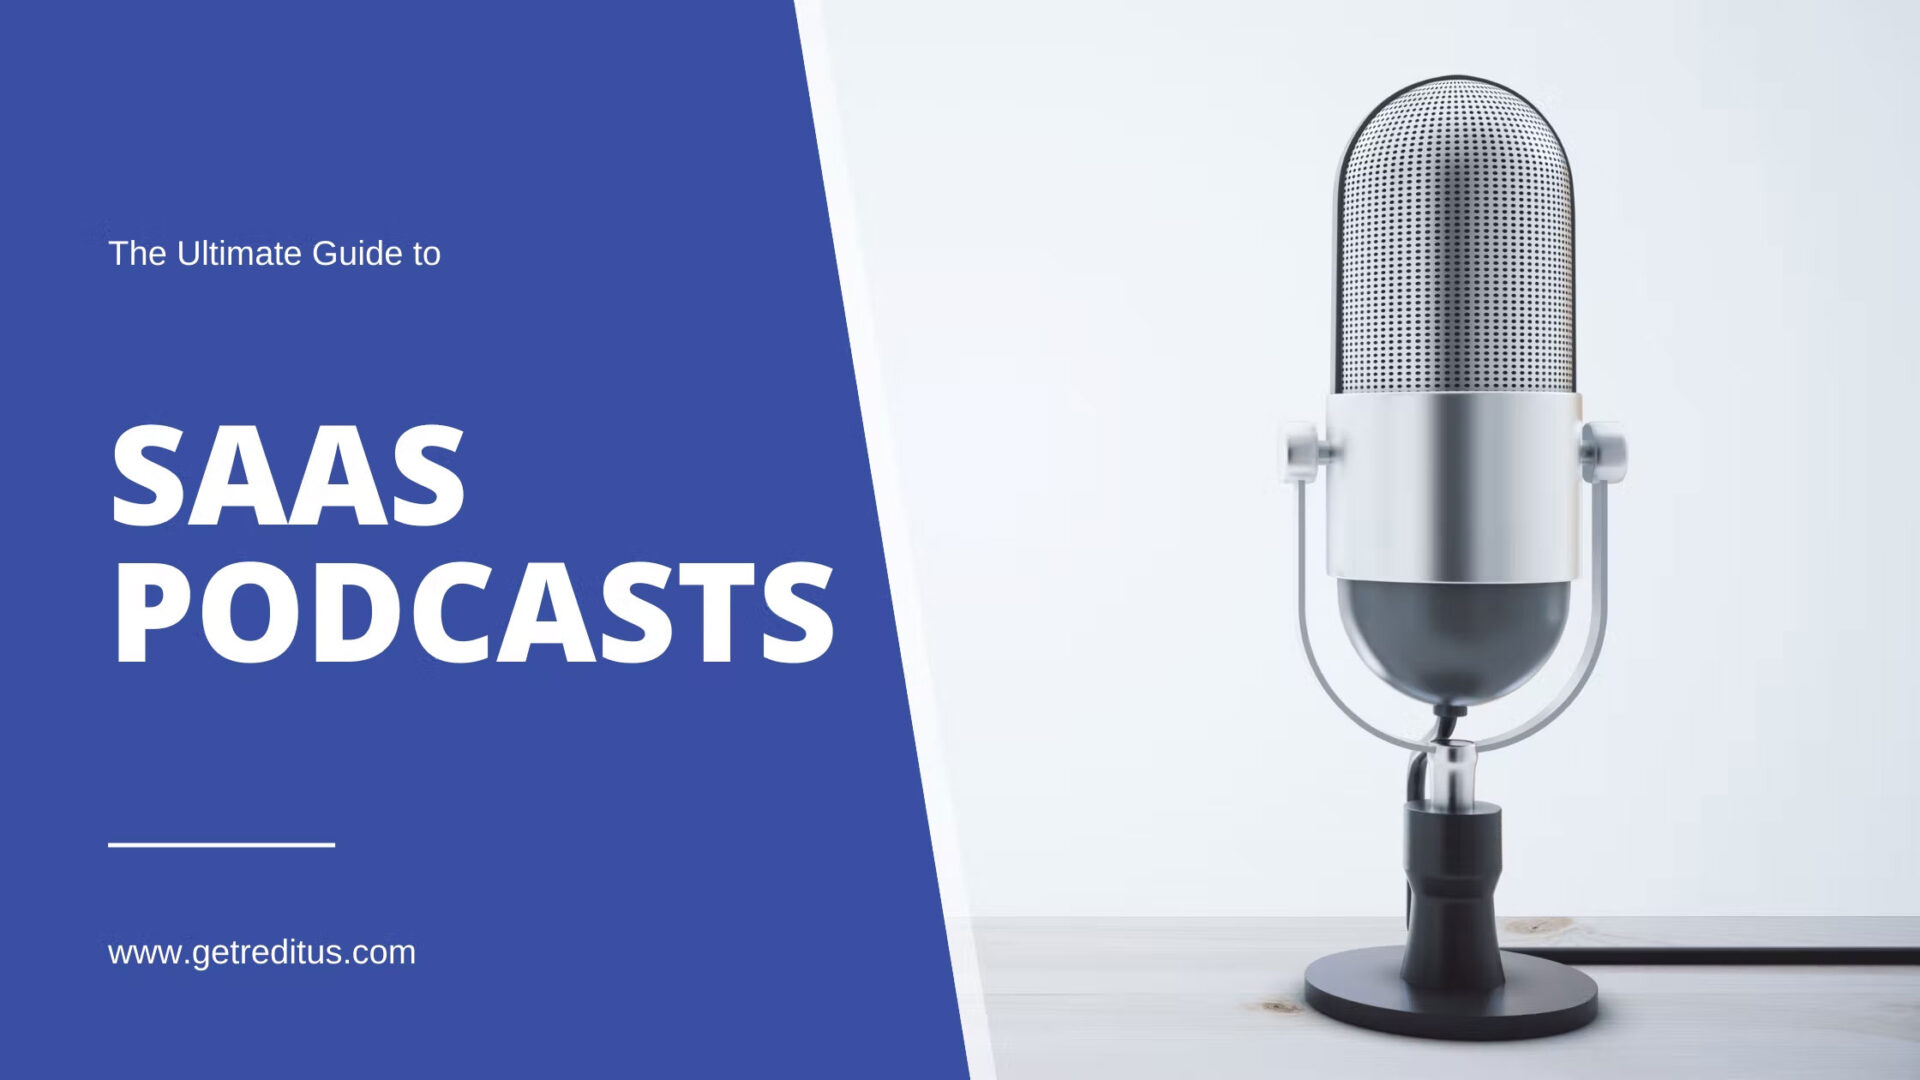 The Ultimate Guide to SaaS Podcasts